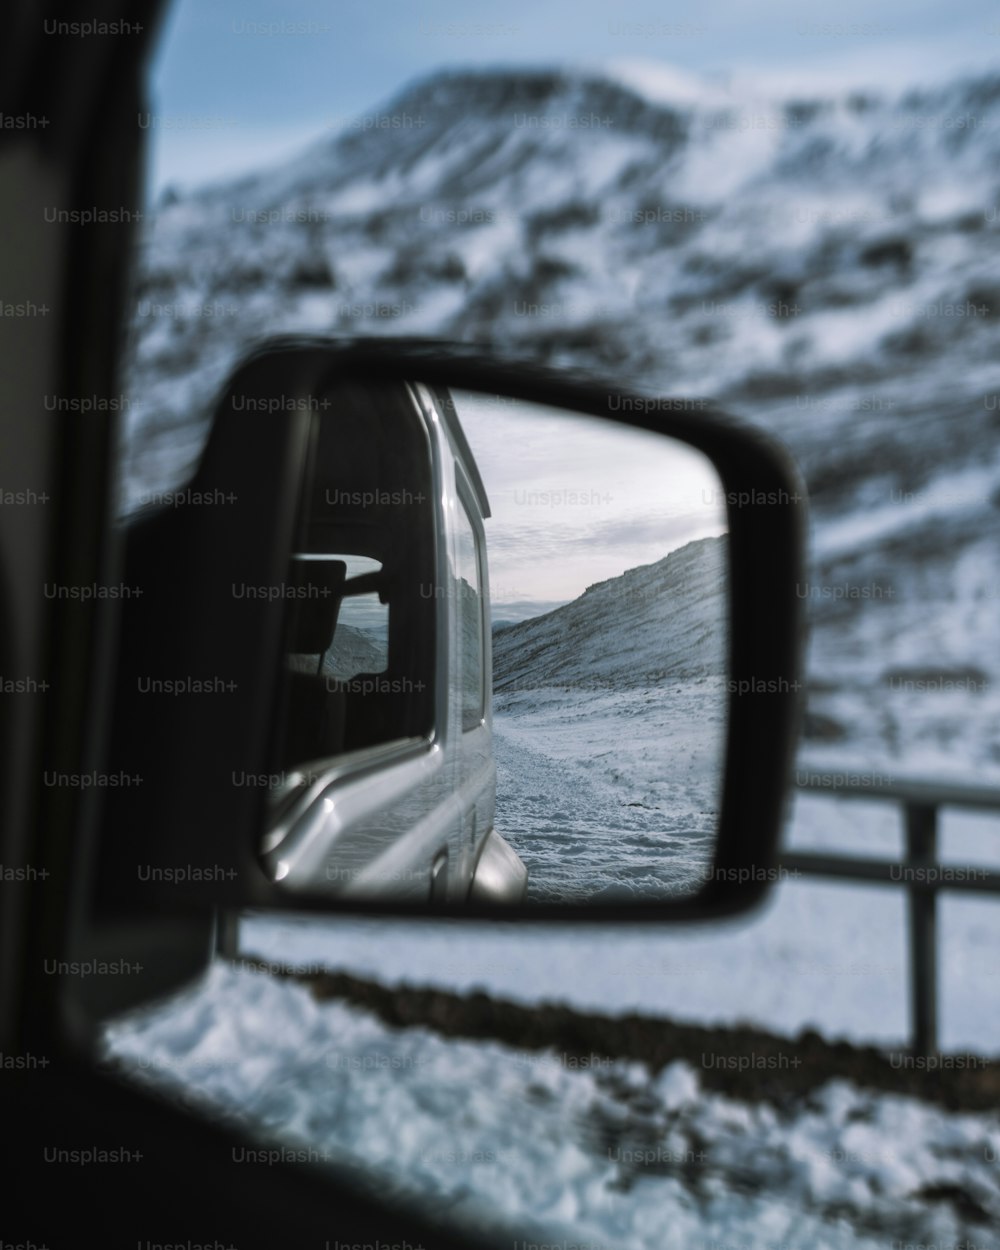 a car's side view mirror with a mountain in the background